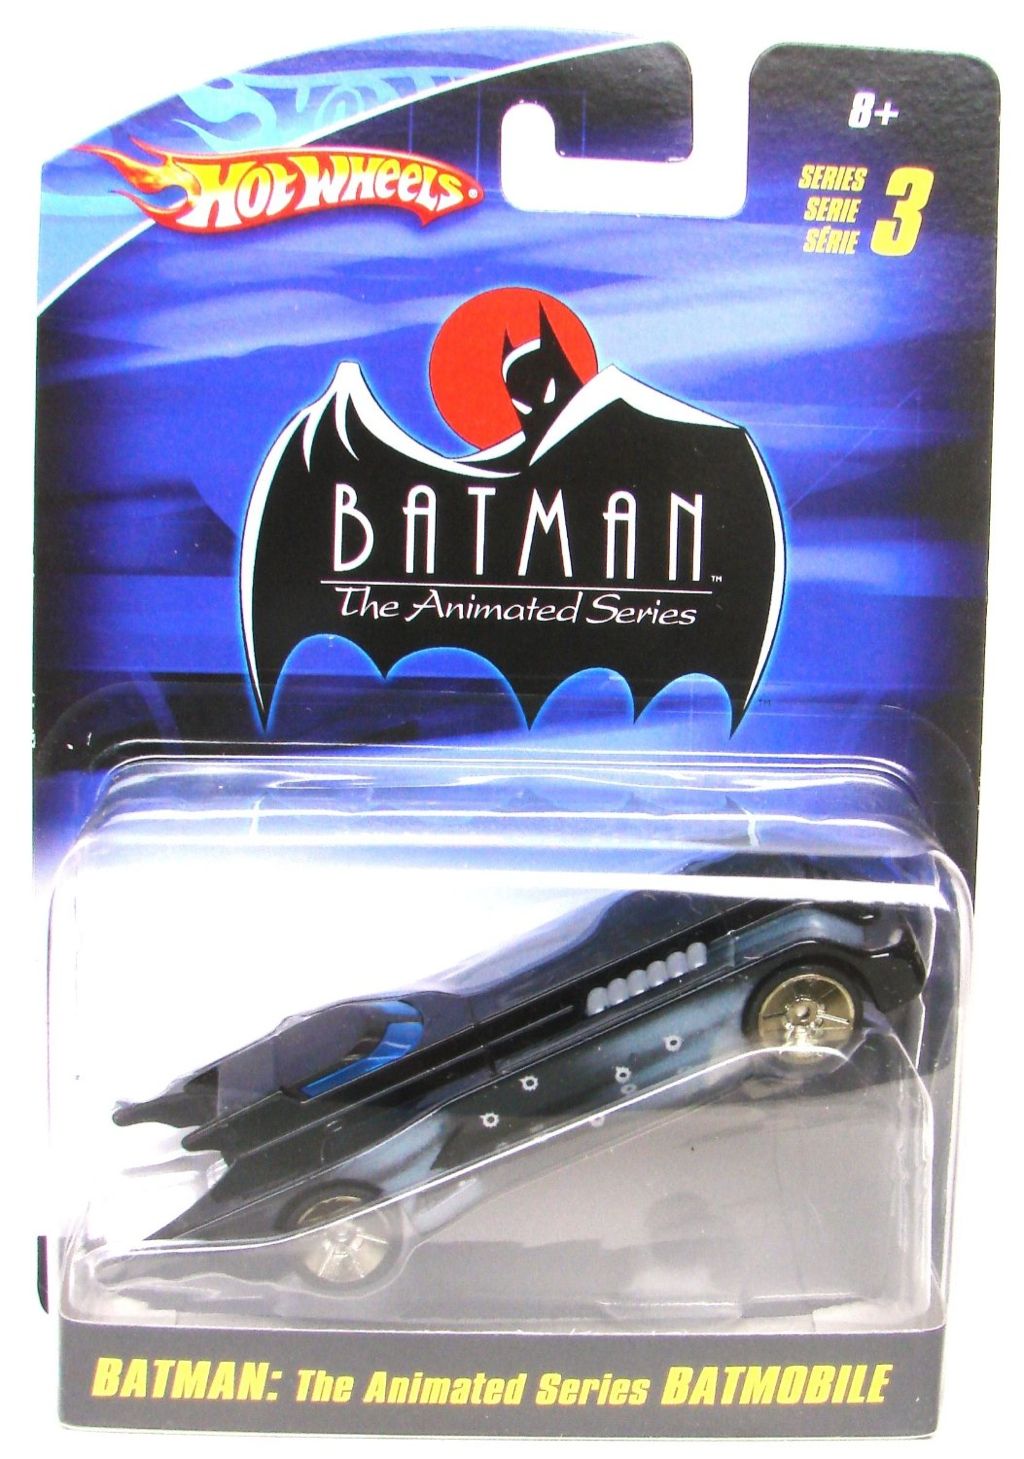 Batman The Animated Series Batmobile With Battle Damage 1:50 Scale - Batman Series 1:50 Scale toy car collectible [Barcode 027084740172] - Main Image 2